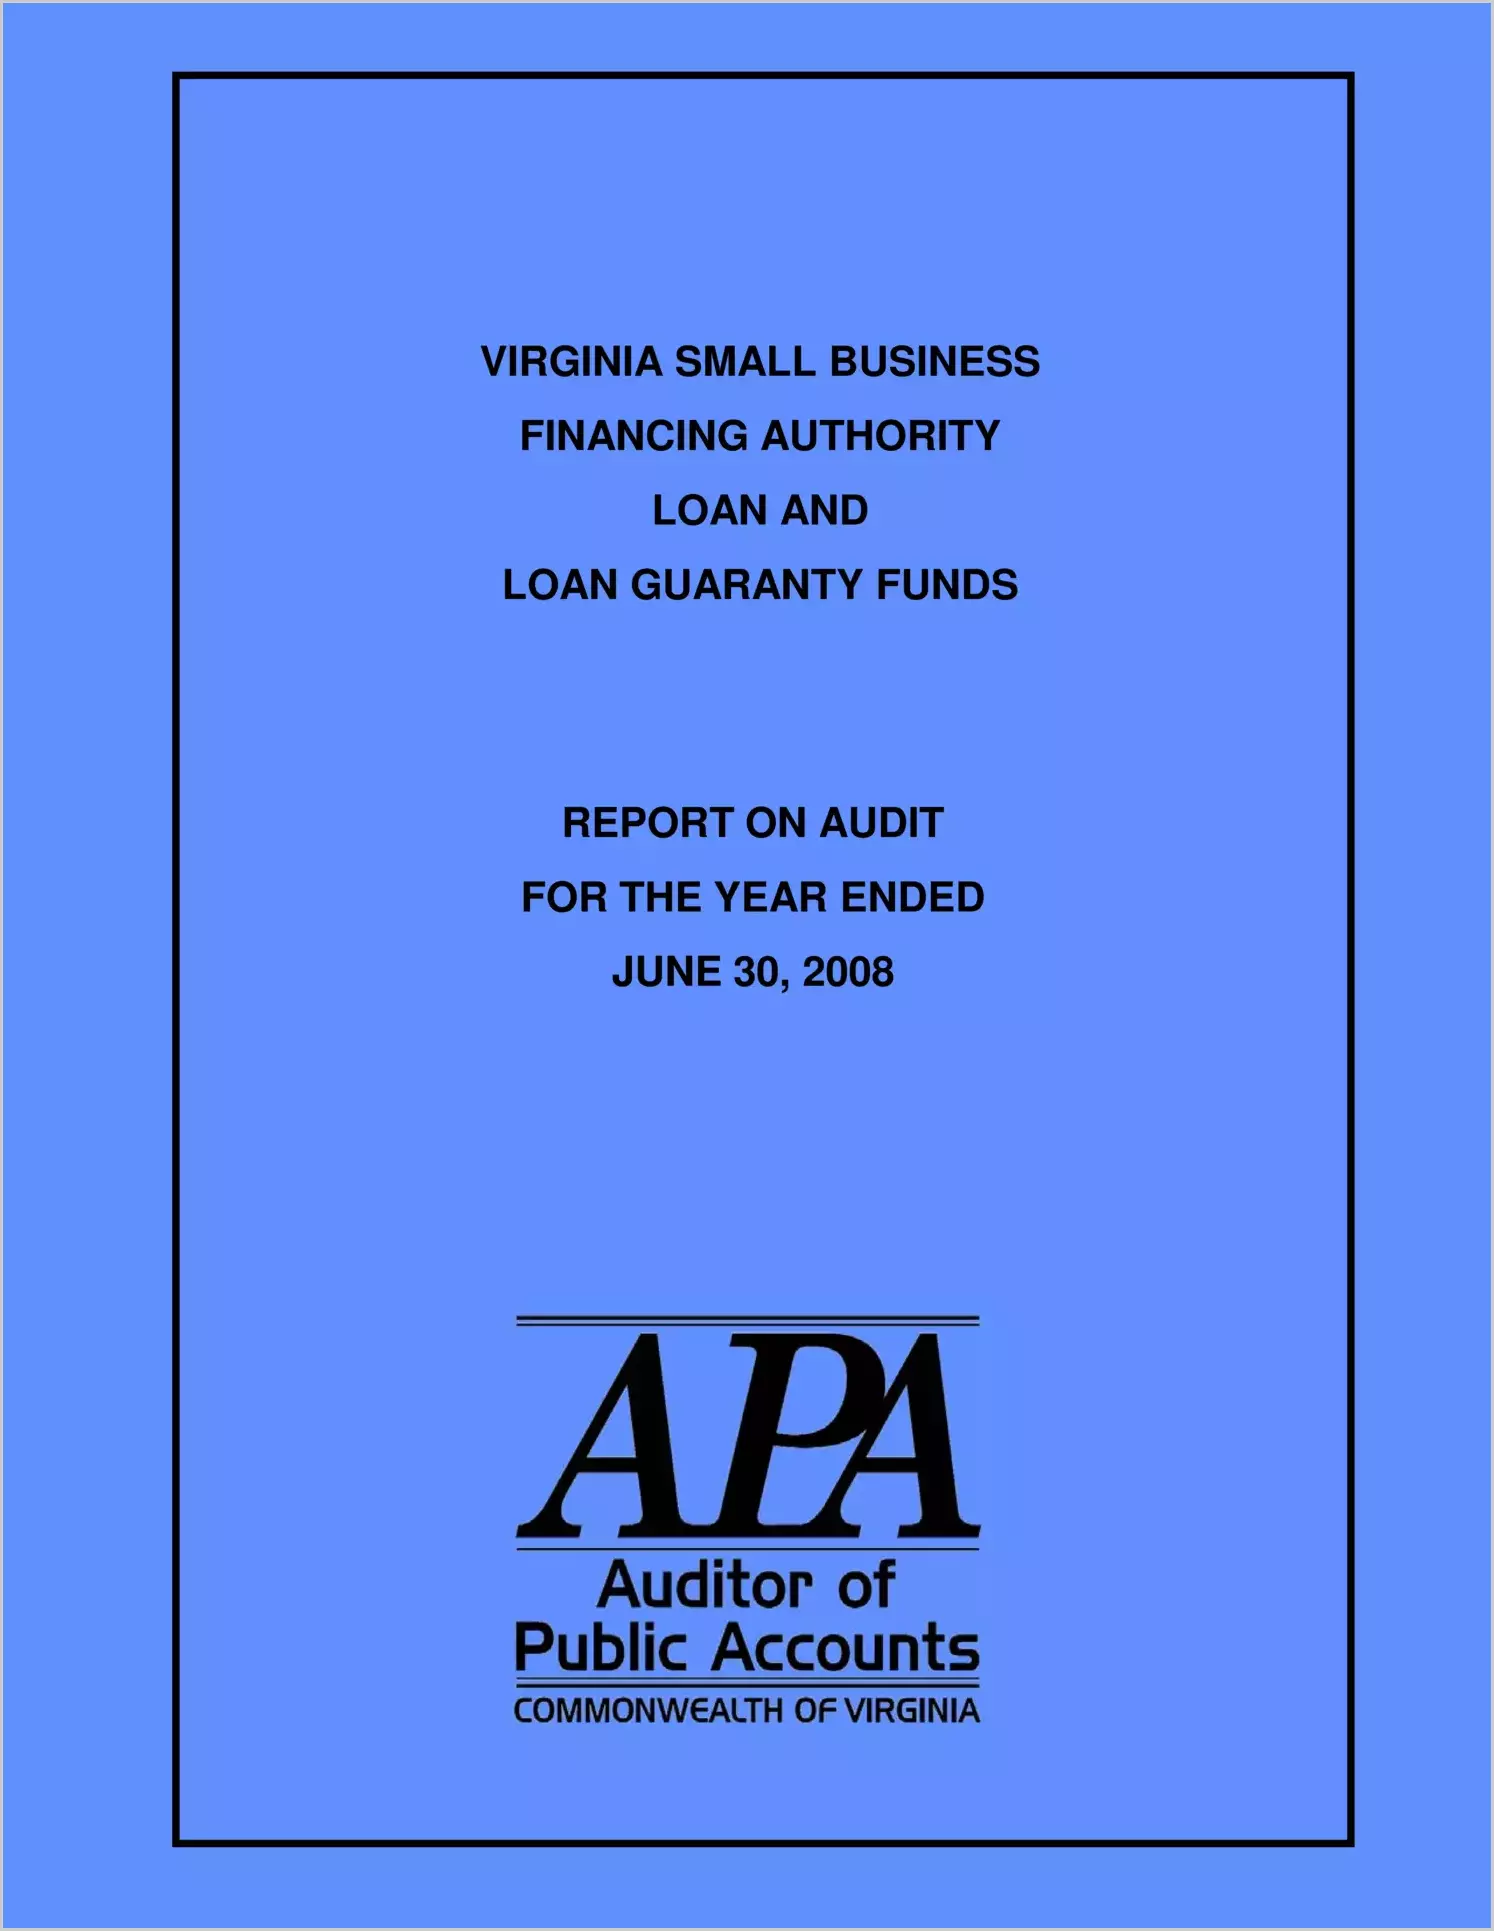 Virginia Small Business Financing Authority  Loan And Loan Guaranty Funds for the year ended June 30, 2008